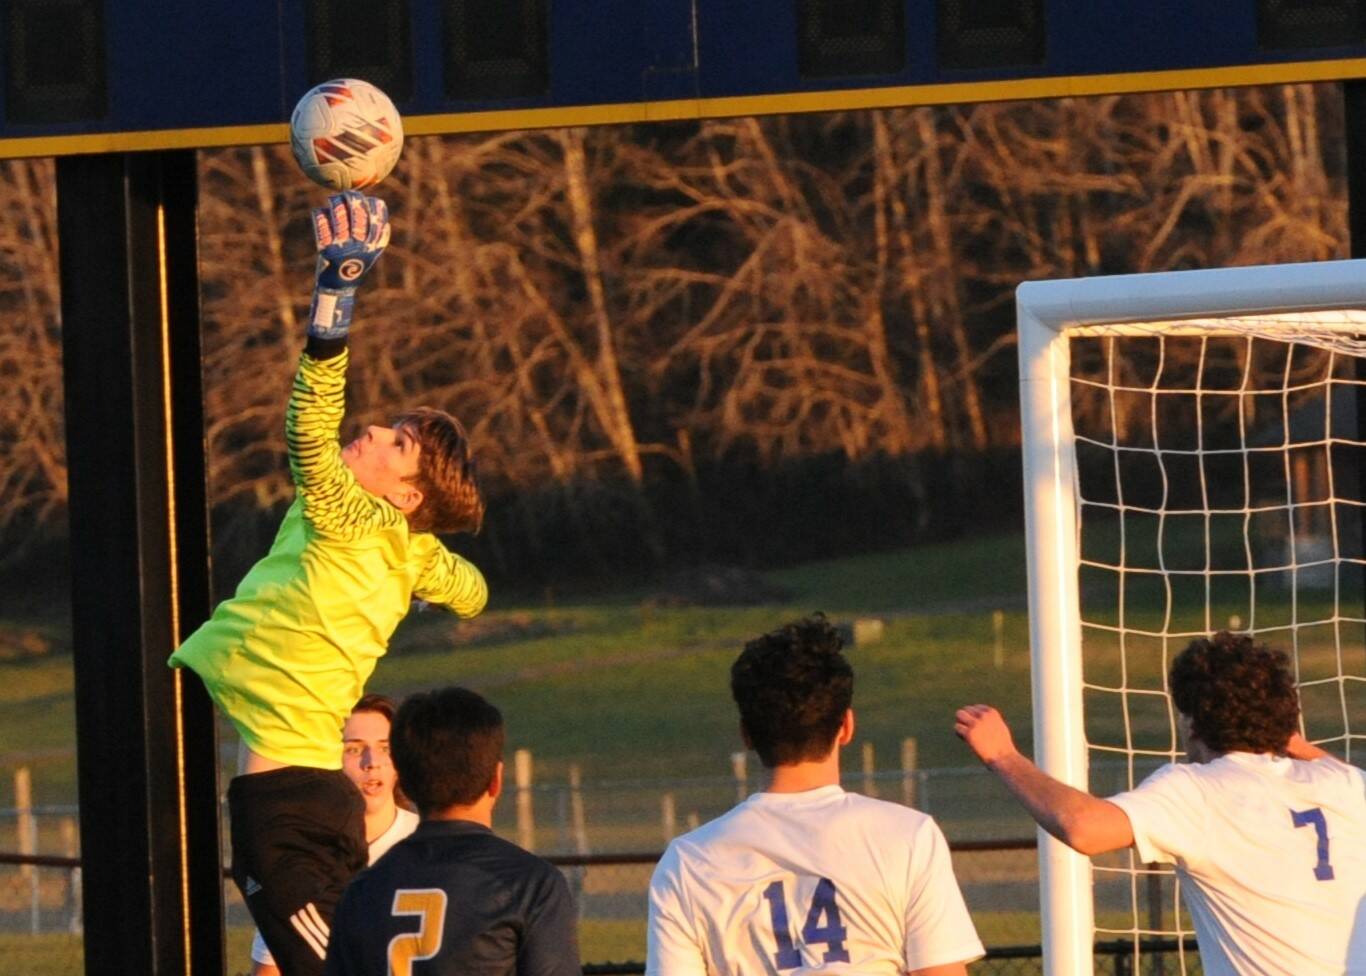 Goalie Juan Terrones makes the save in front of the net. Also shown is Estevan Ramos (2). Photo by Lonnie Archibald